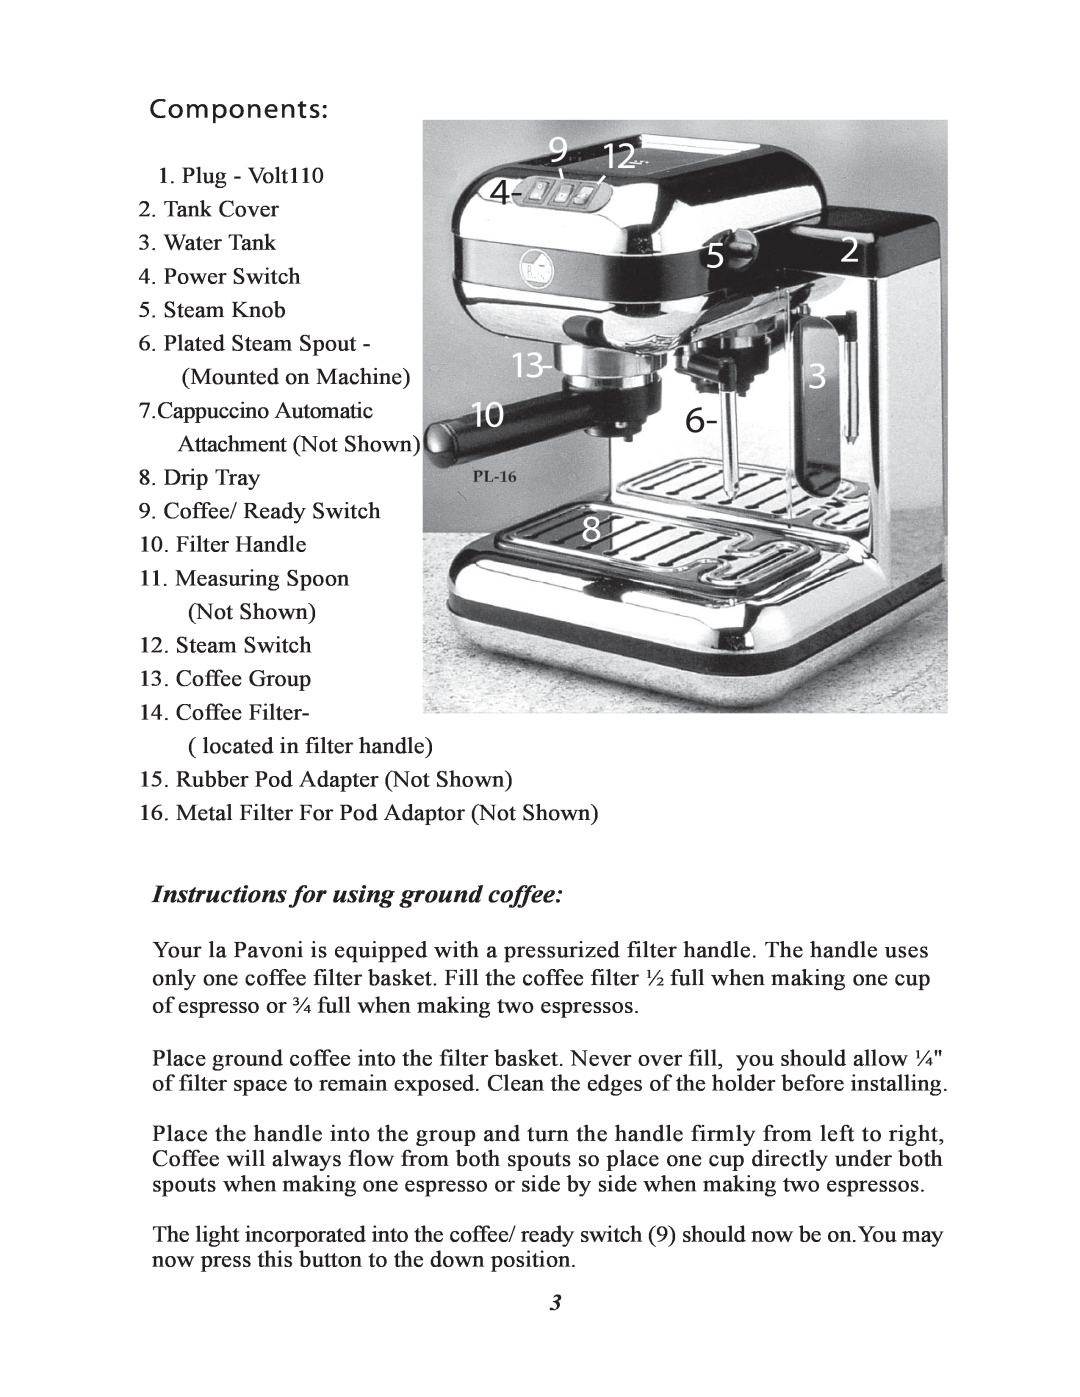 La Pavoni PAB-16, PL-16 manual Instructions for using ground coffee, Components 